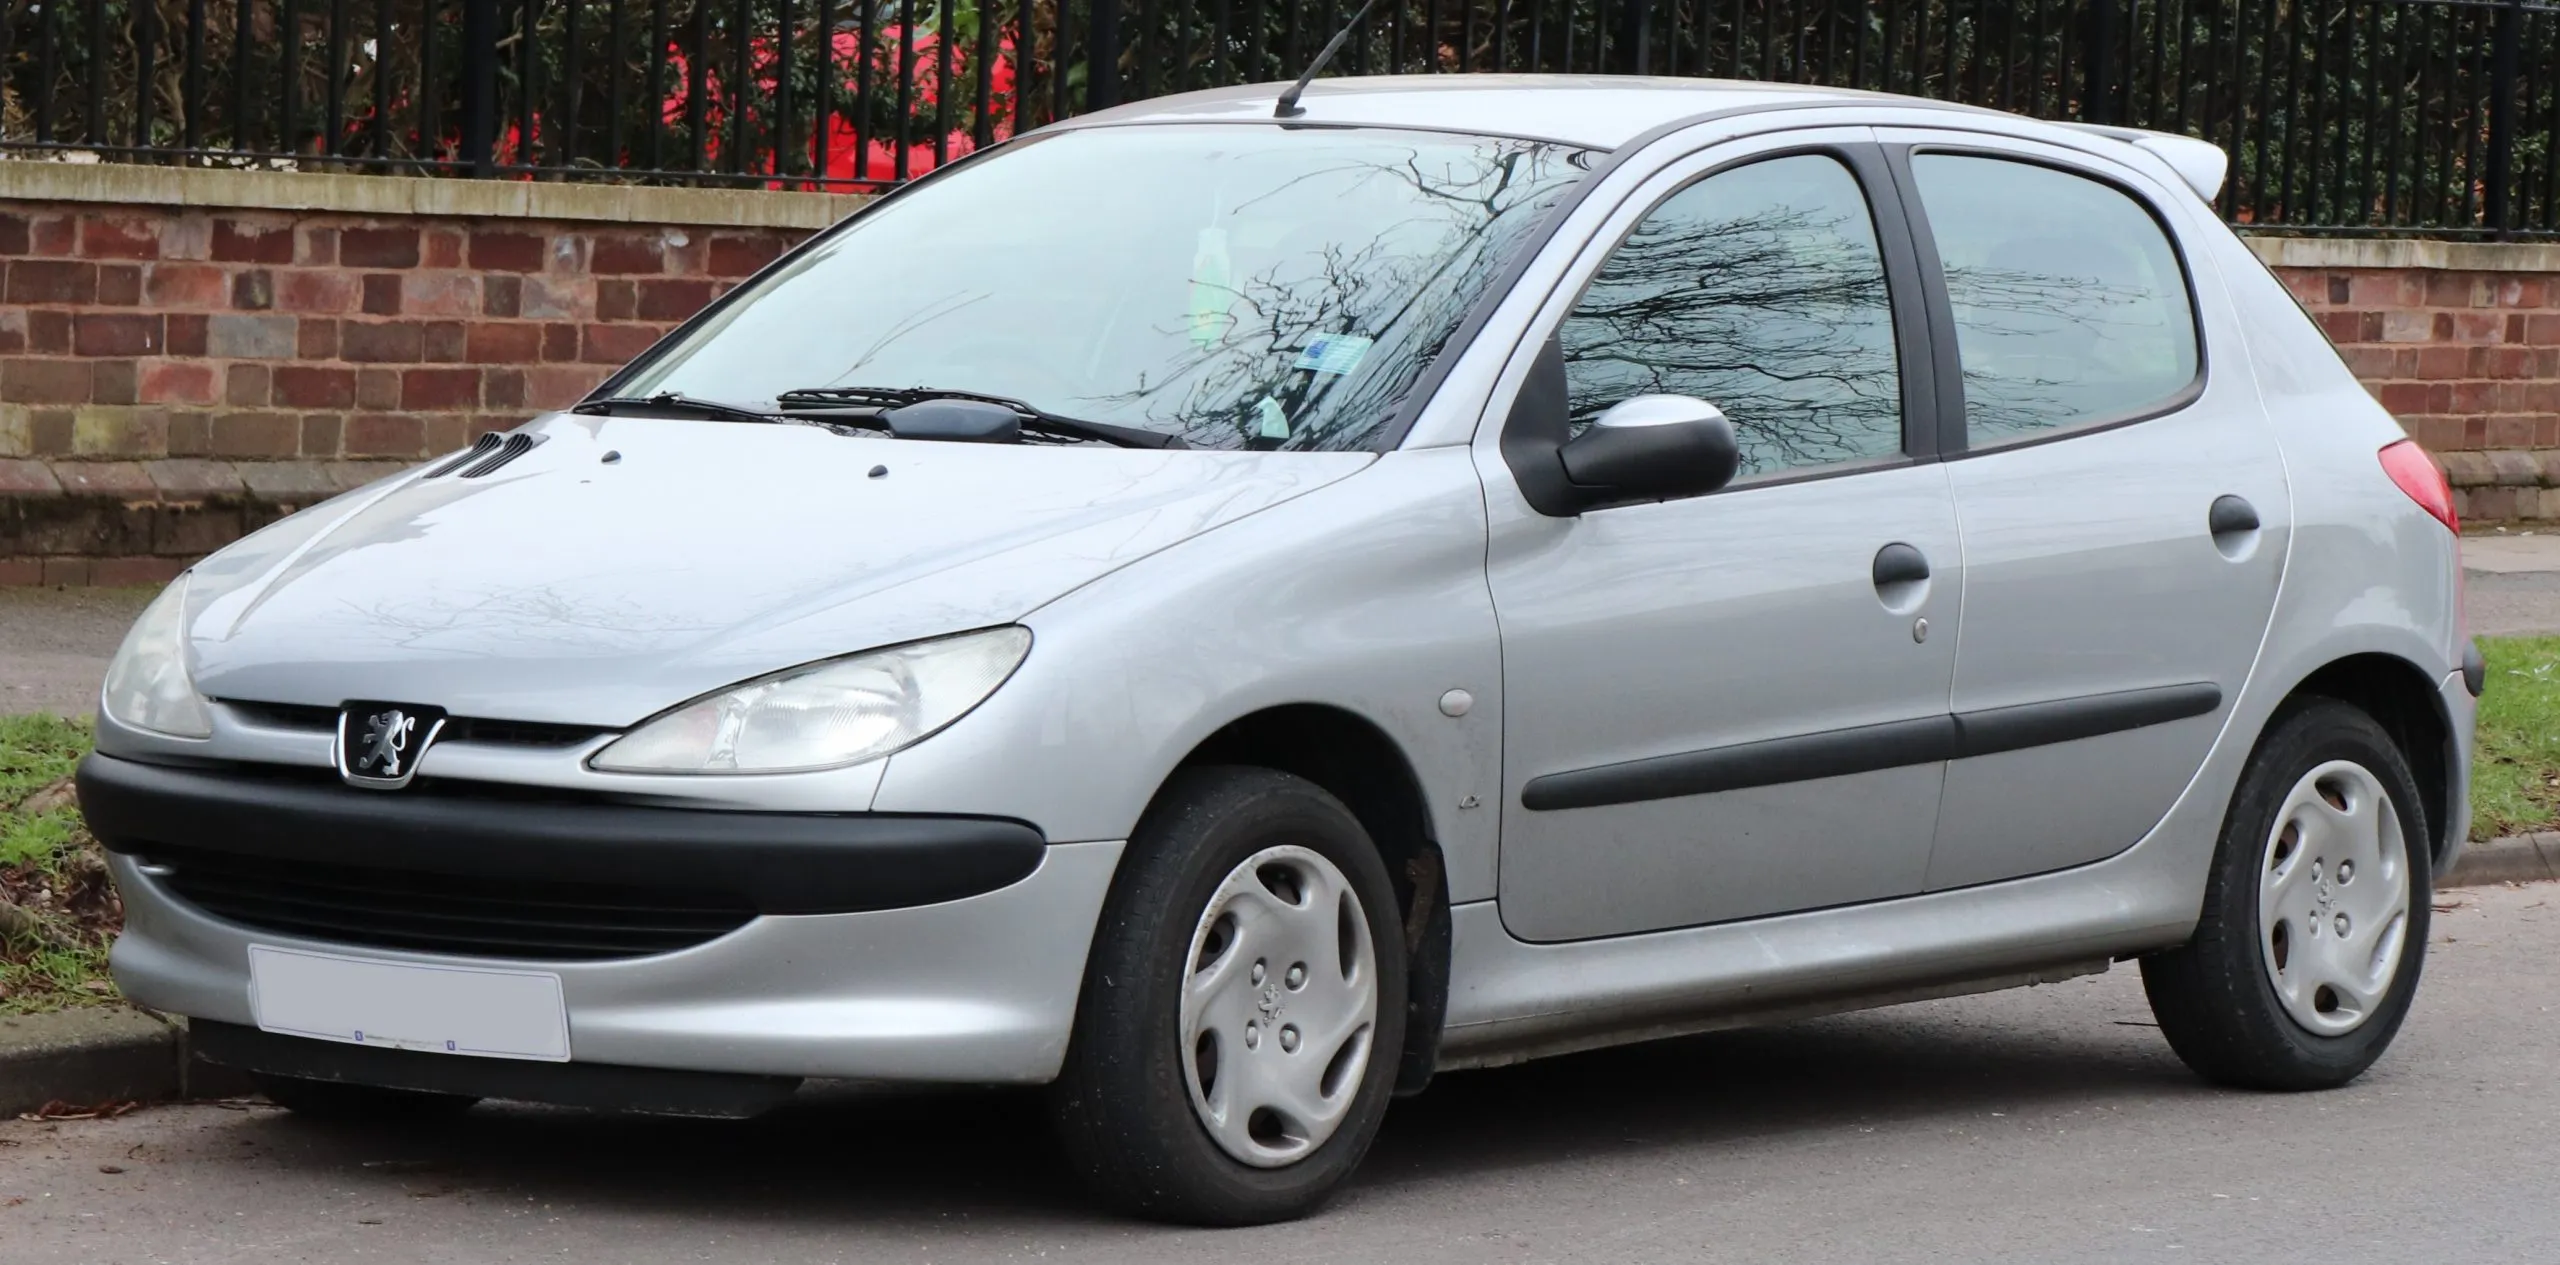 2002 peugeot 206 lx 14 front scaled